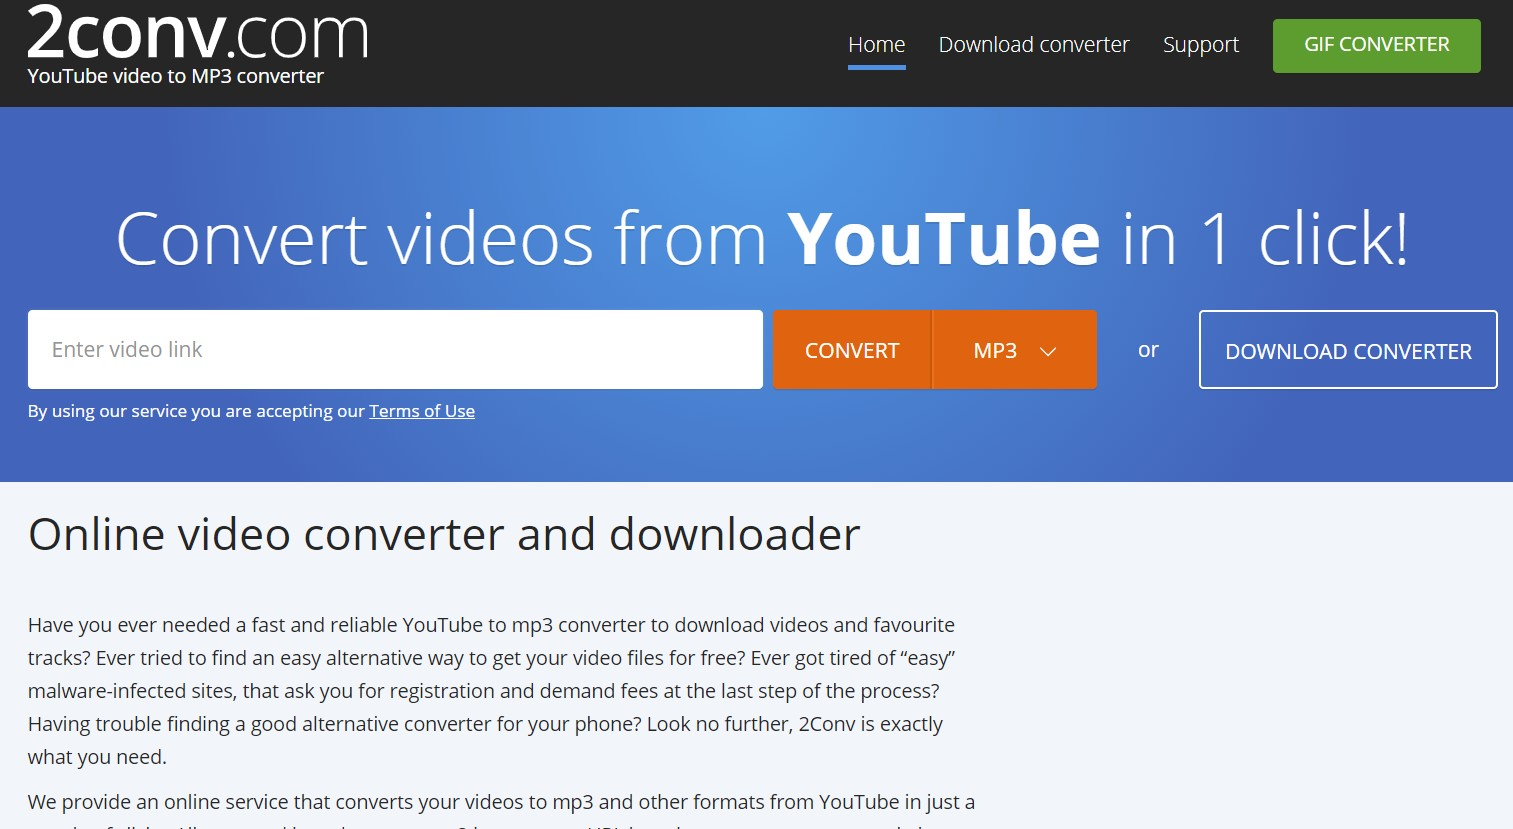 wma to video converter youtube